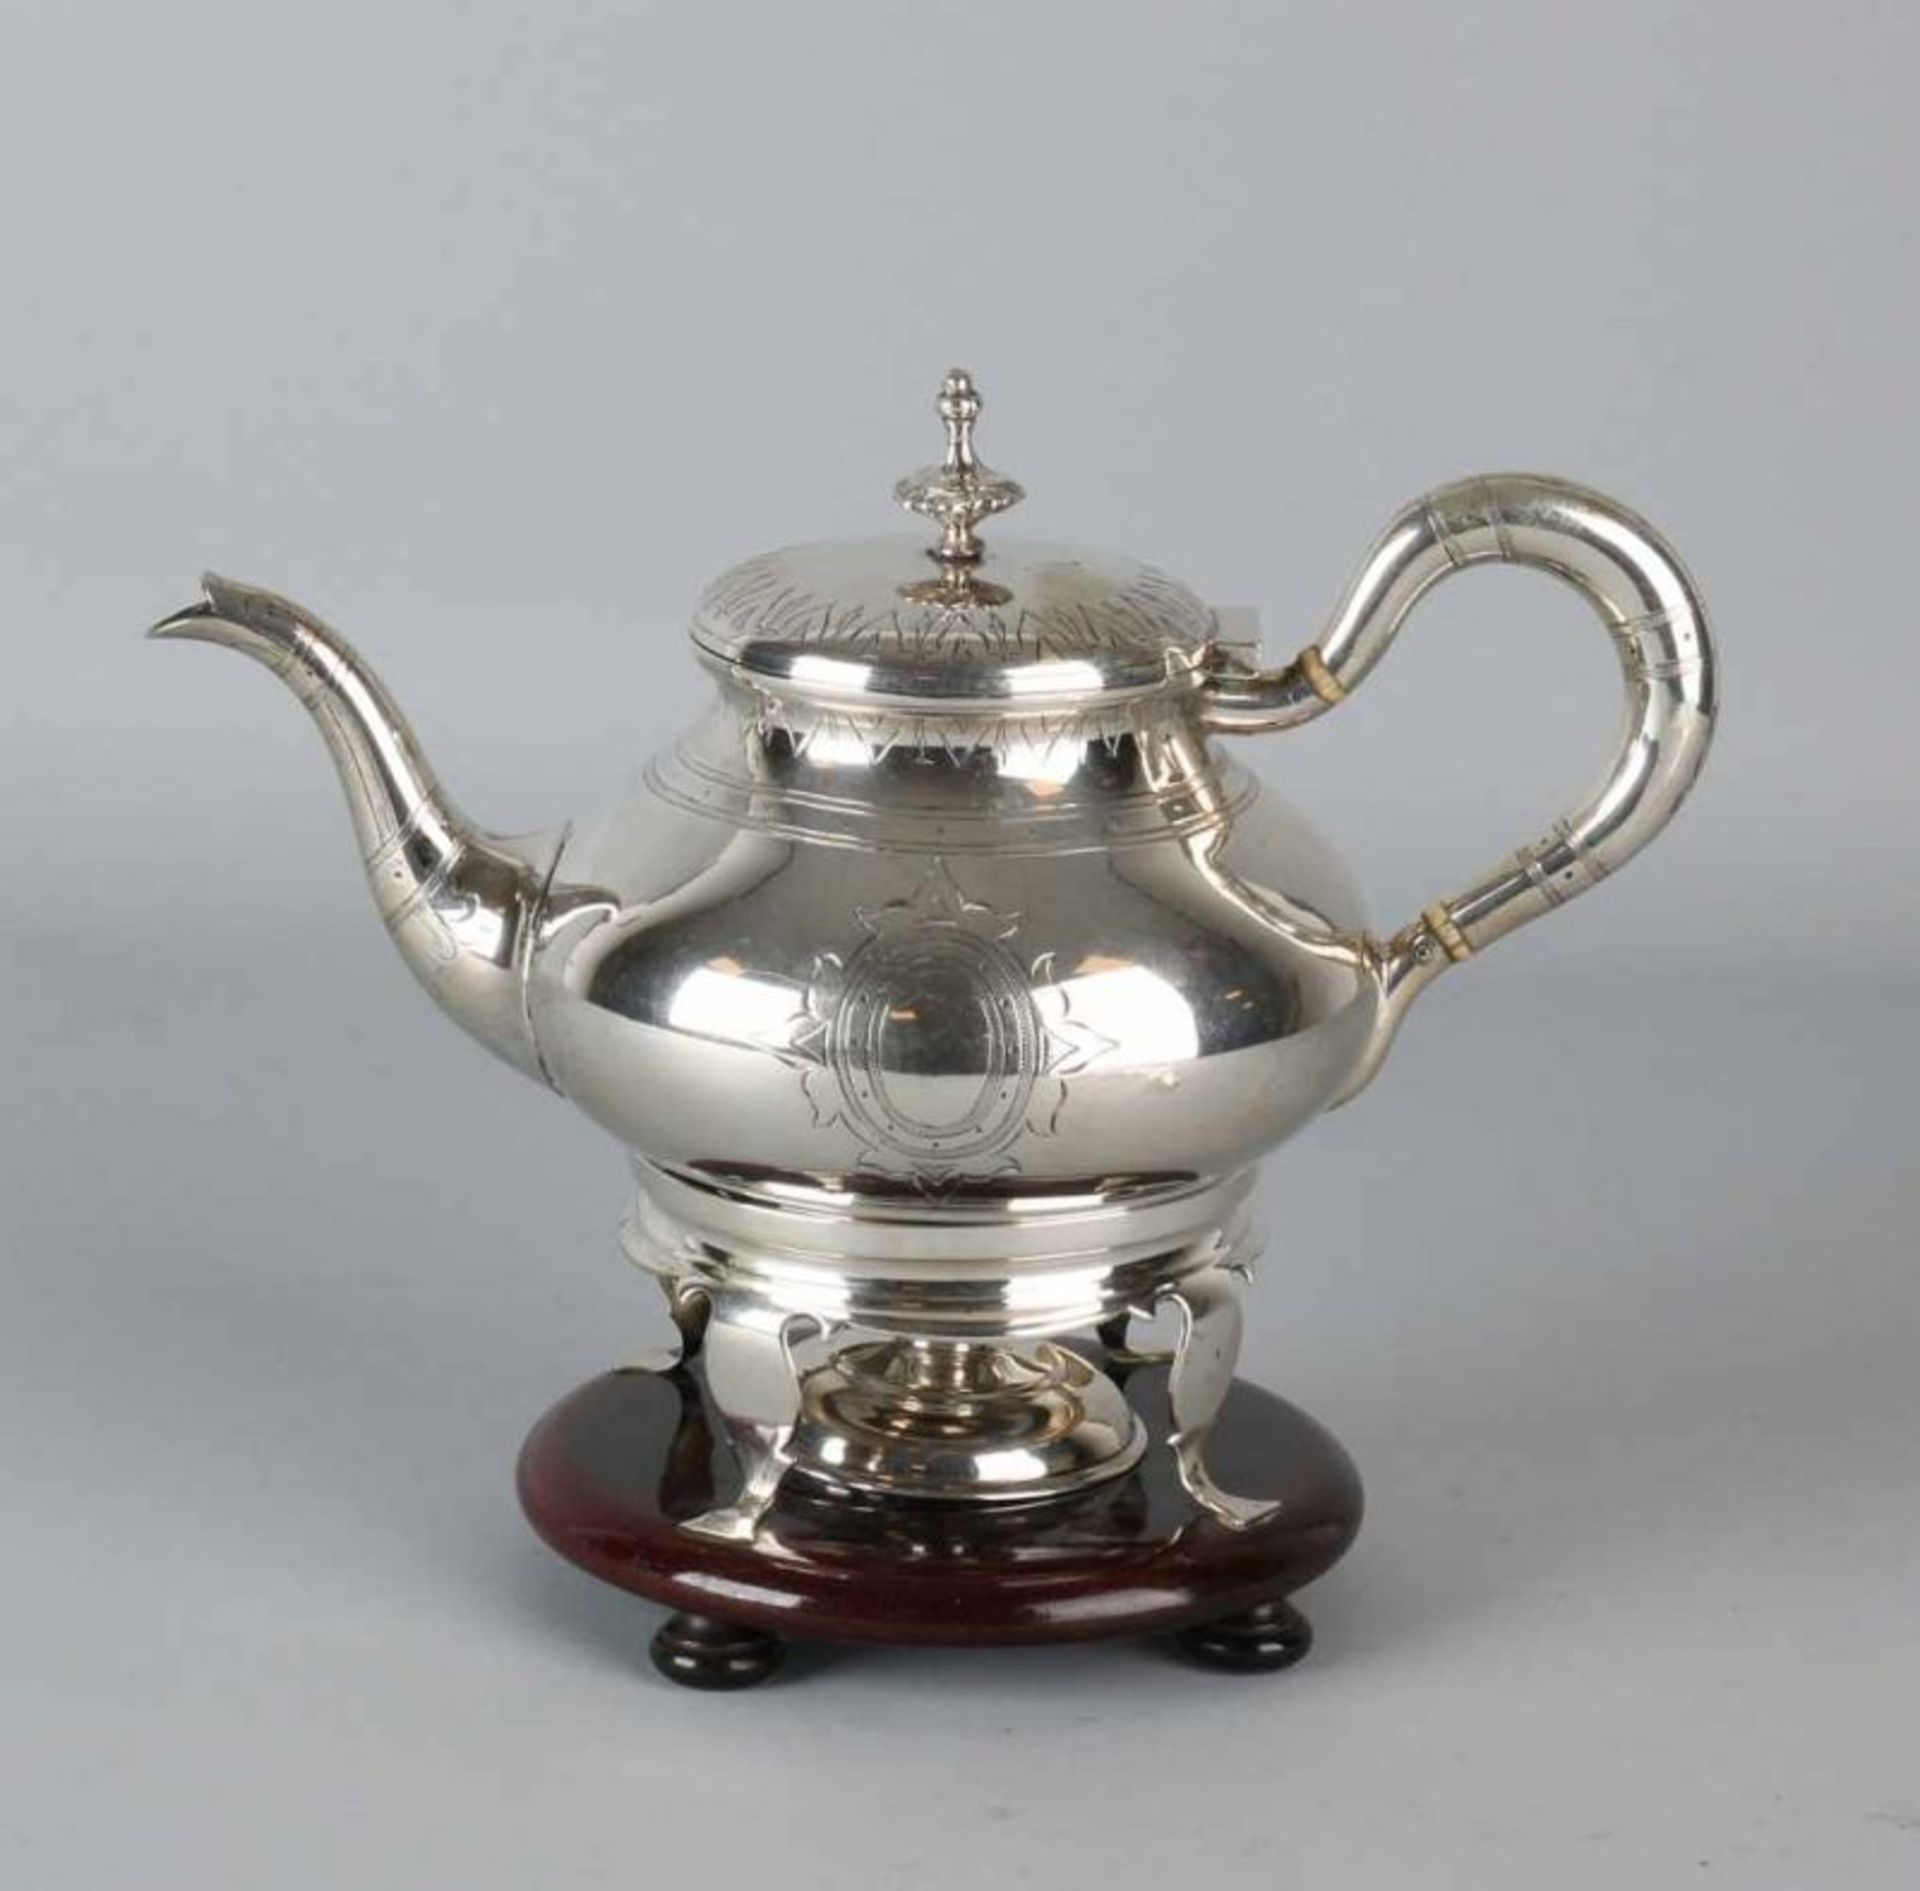 Silver 835/000 teapot on matching 835/000 silver stove with original 835/000 silver burner on wooden